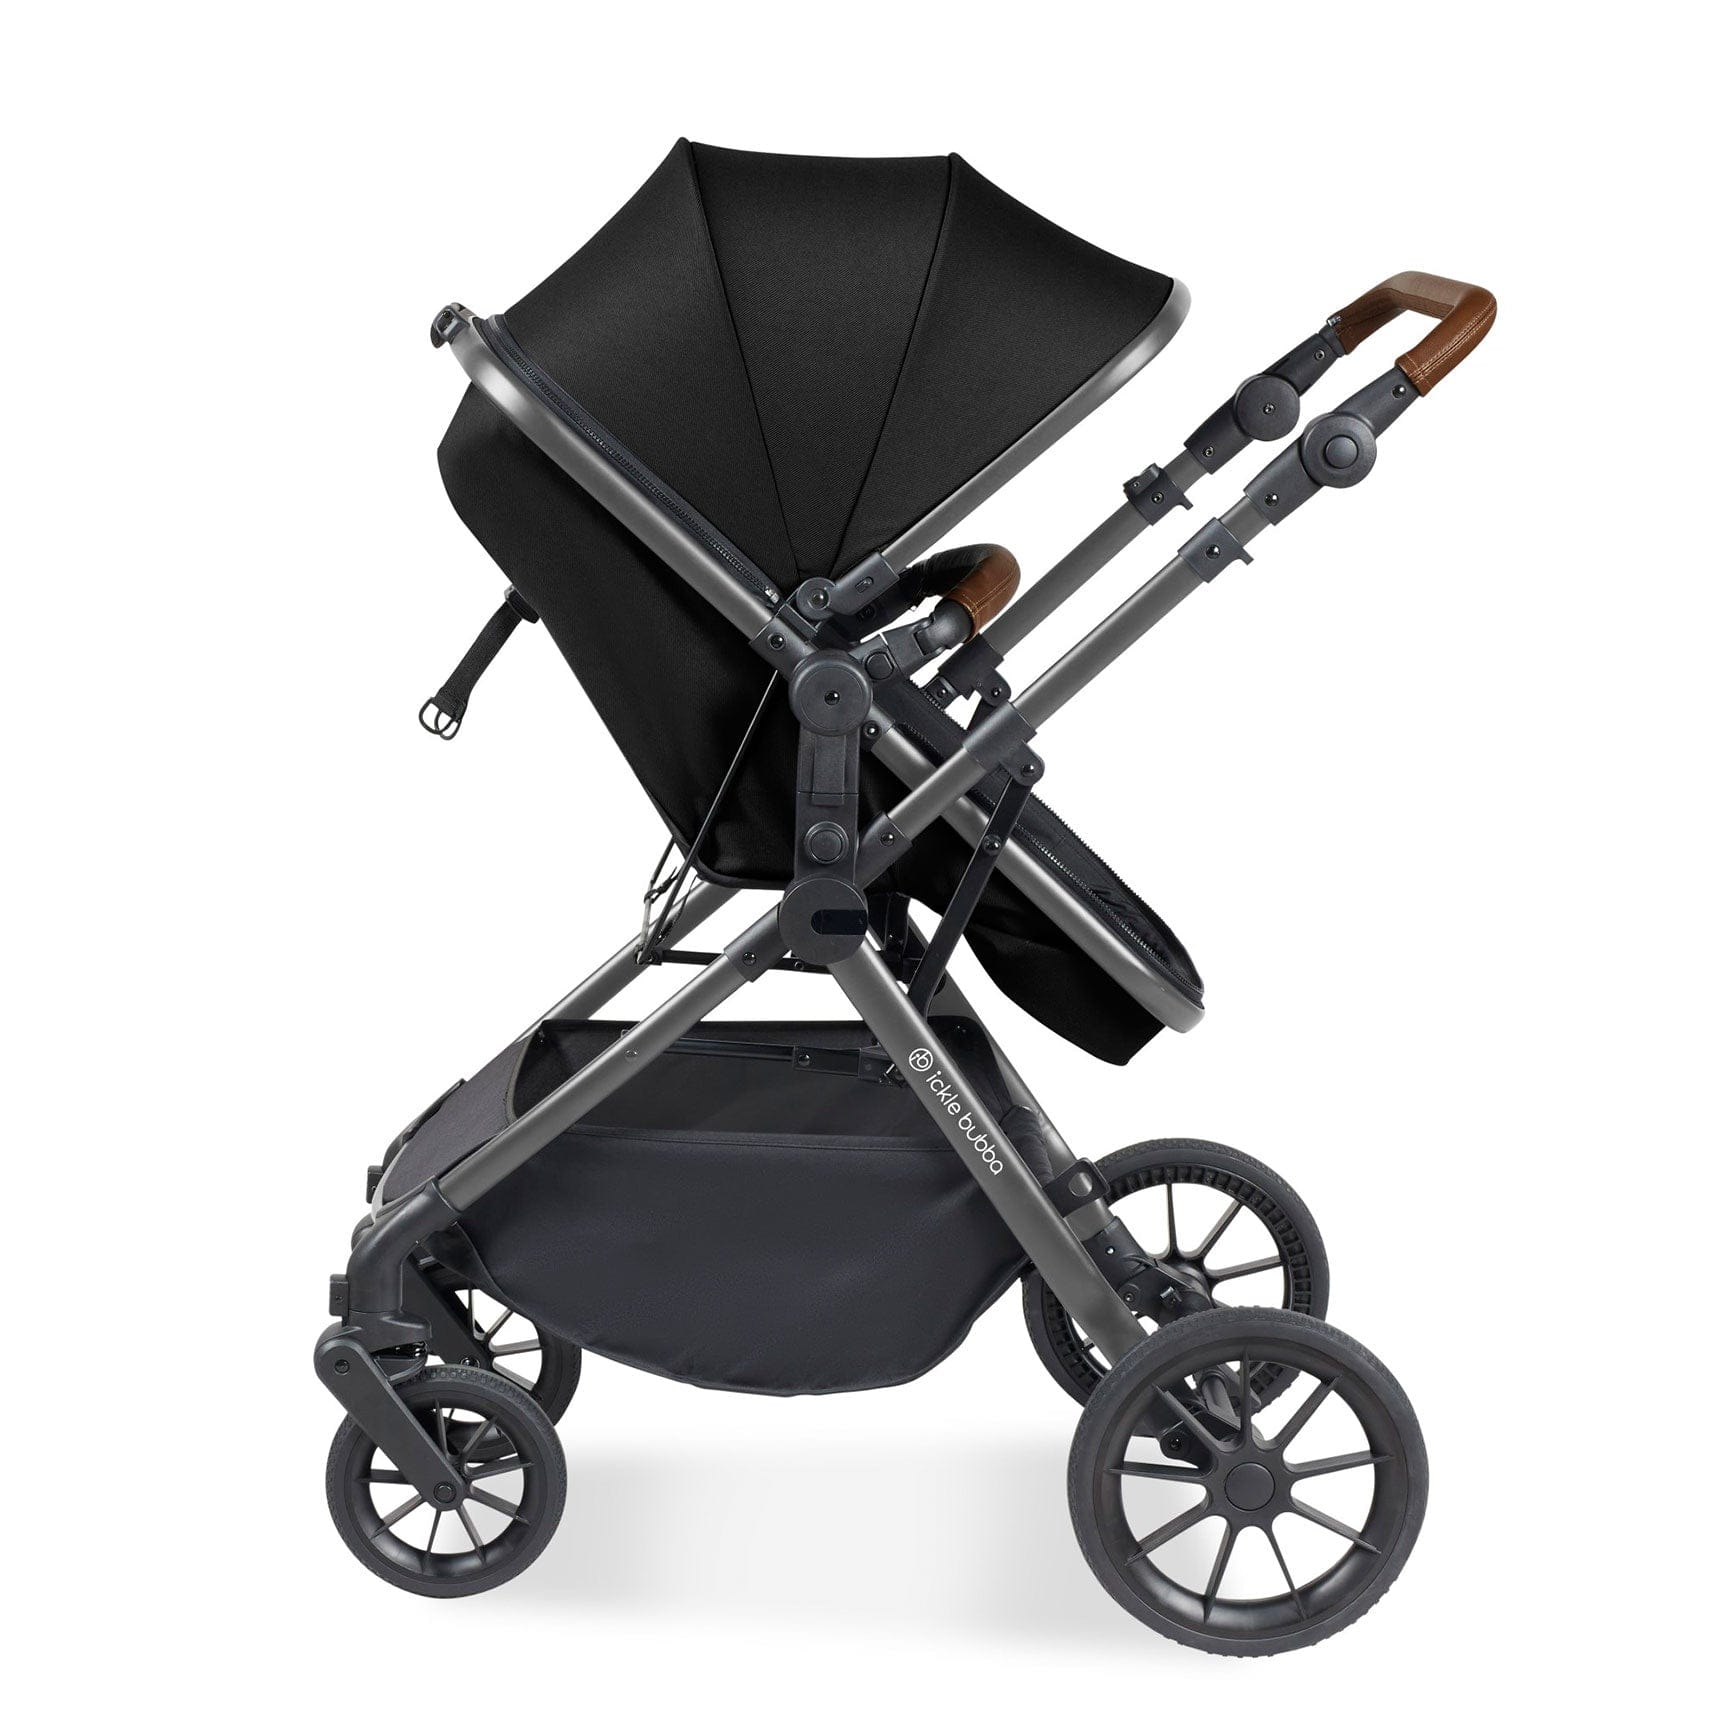 Ickle Bubba Cosmo All-in-One I-Size Travel System with Isofix Base in Black/Gun Metal Travel Systems 10-007-300-135 5056515025835